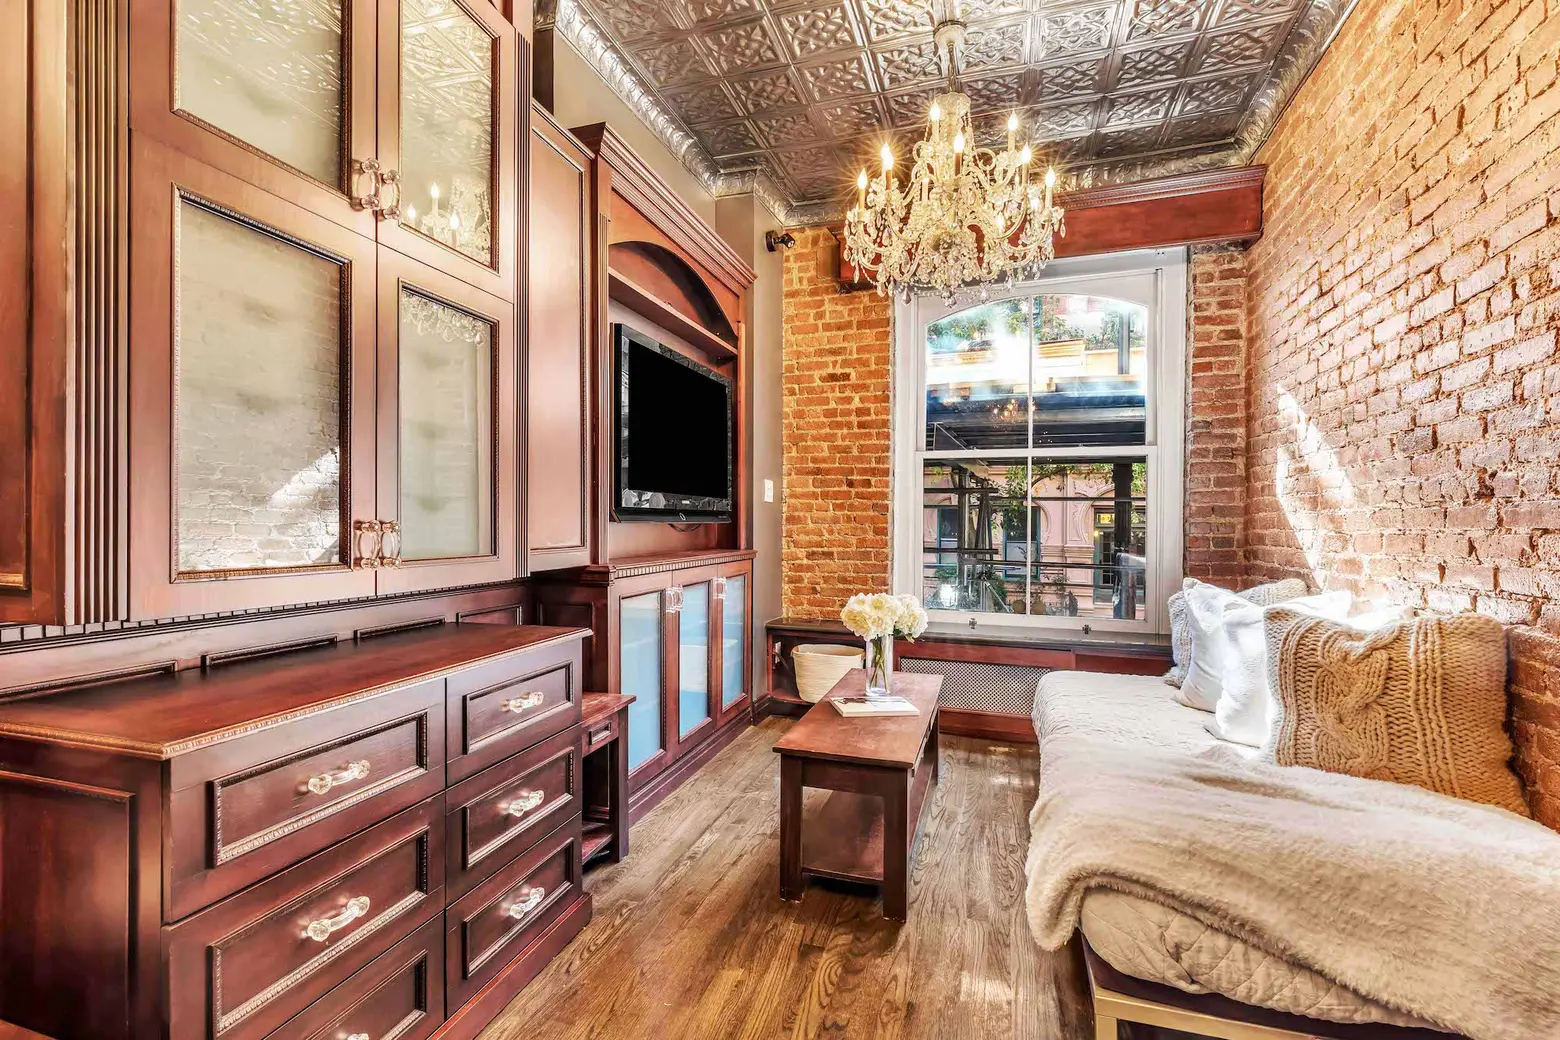 Tiny West Village studio is big on Victorian style for $525K